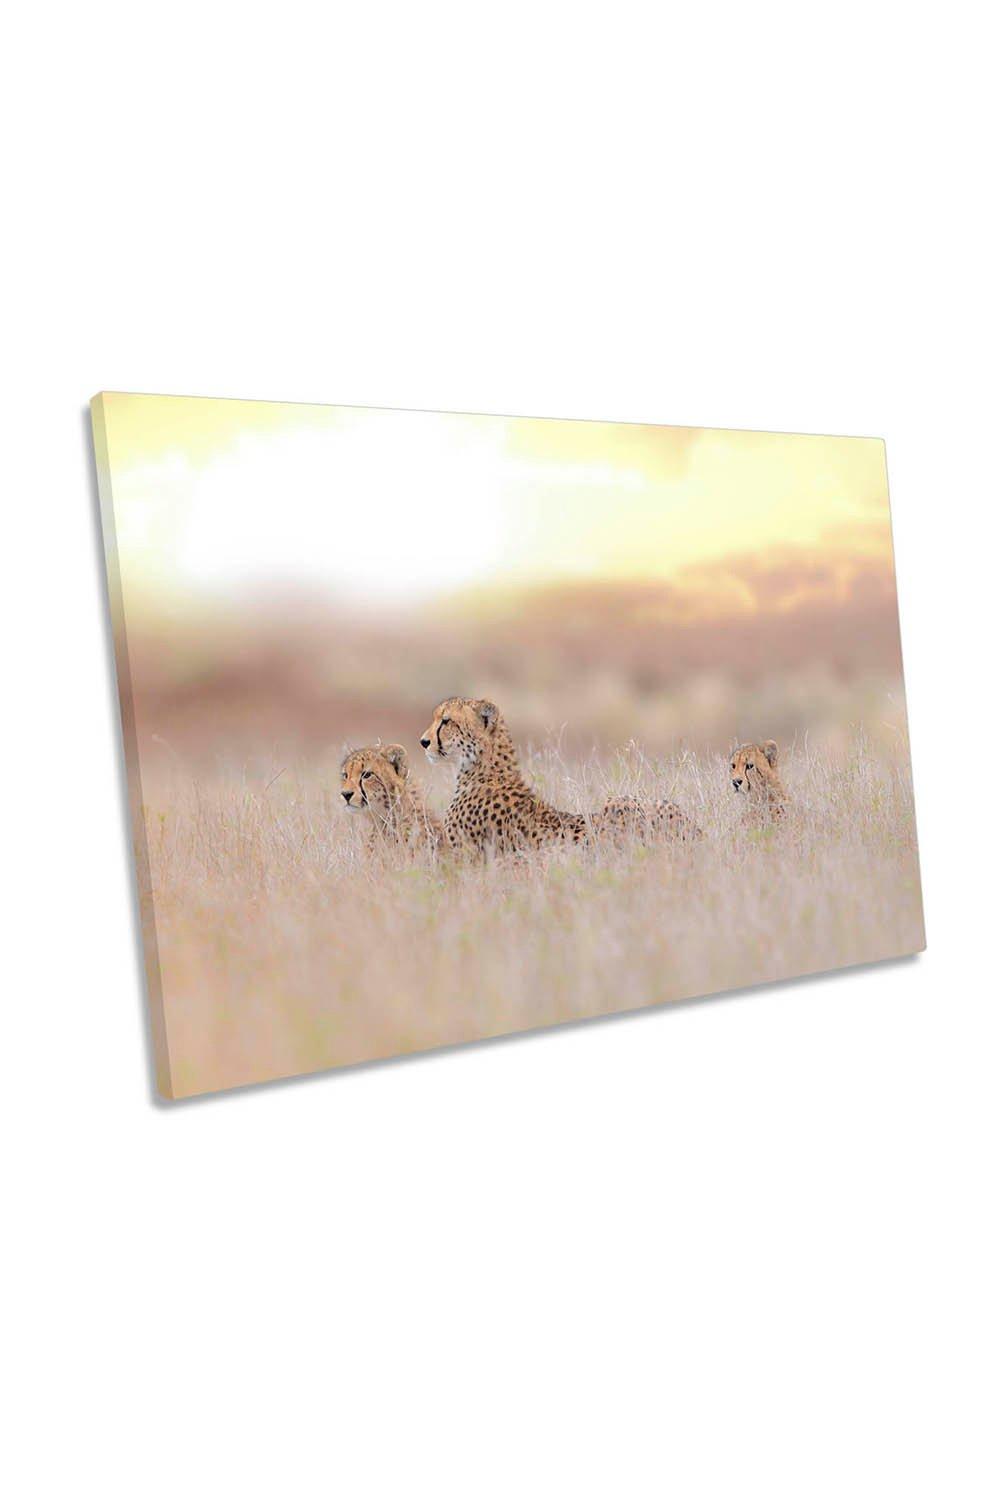 Cheetah Family Wildlife Yellow Sunset Canvas Wall Art Picture Print